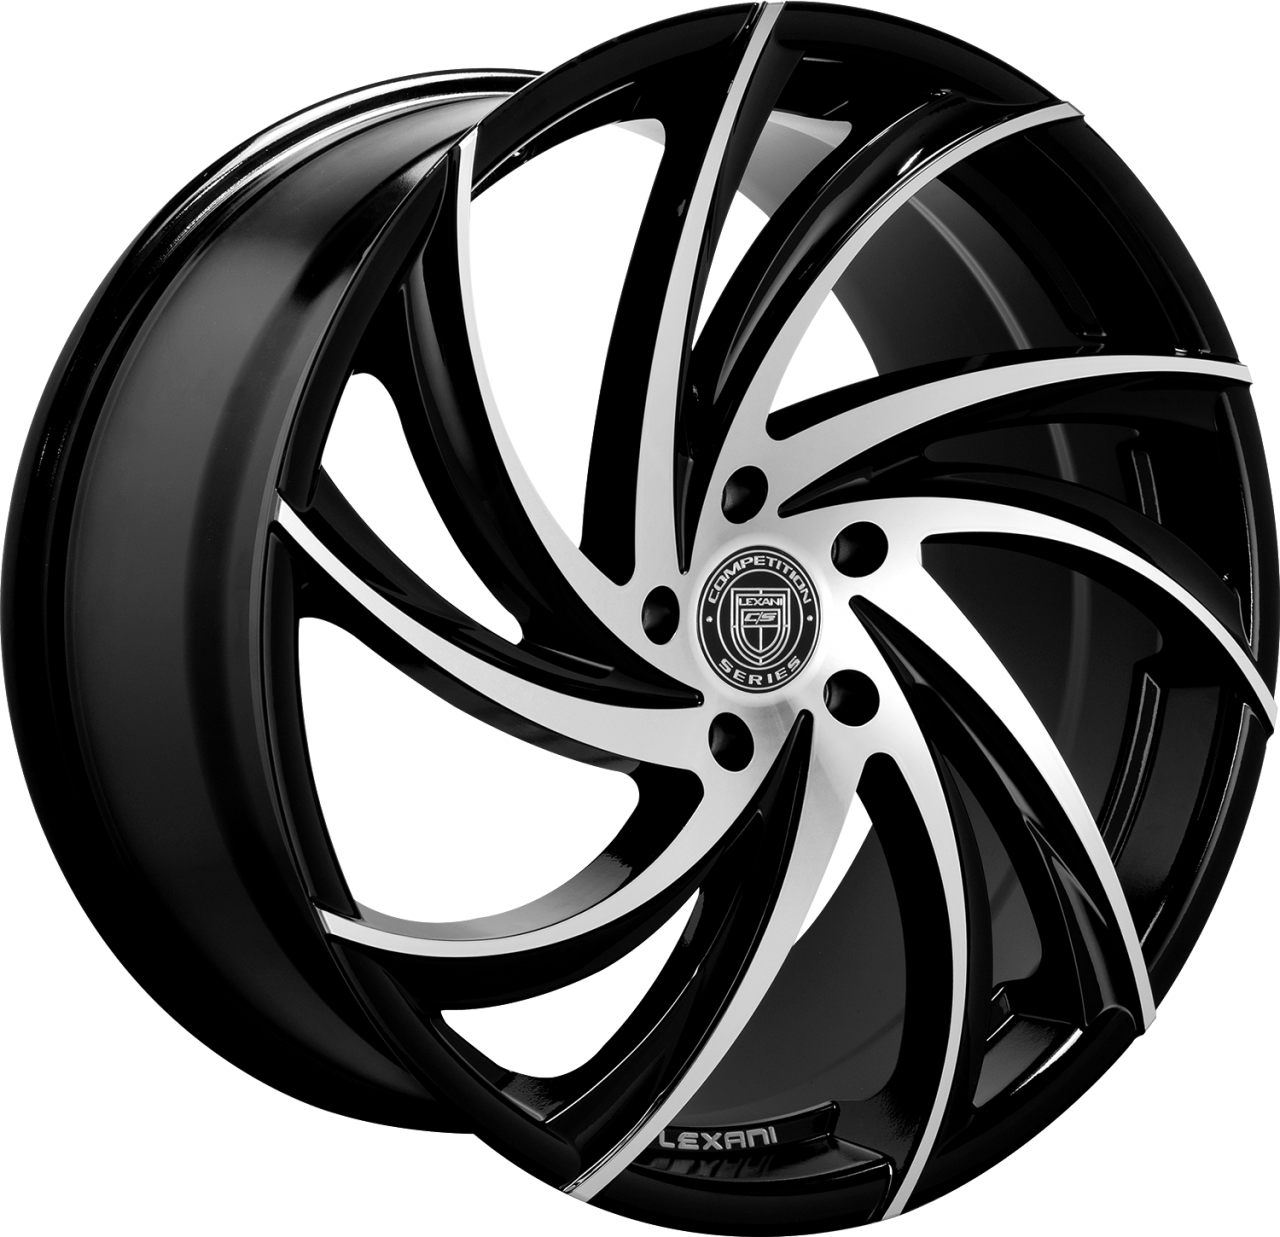 Artis Forged Twister wheel with MB finish